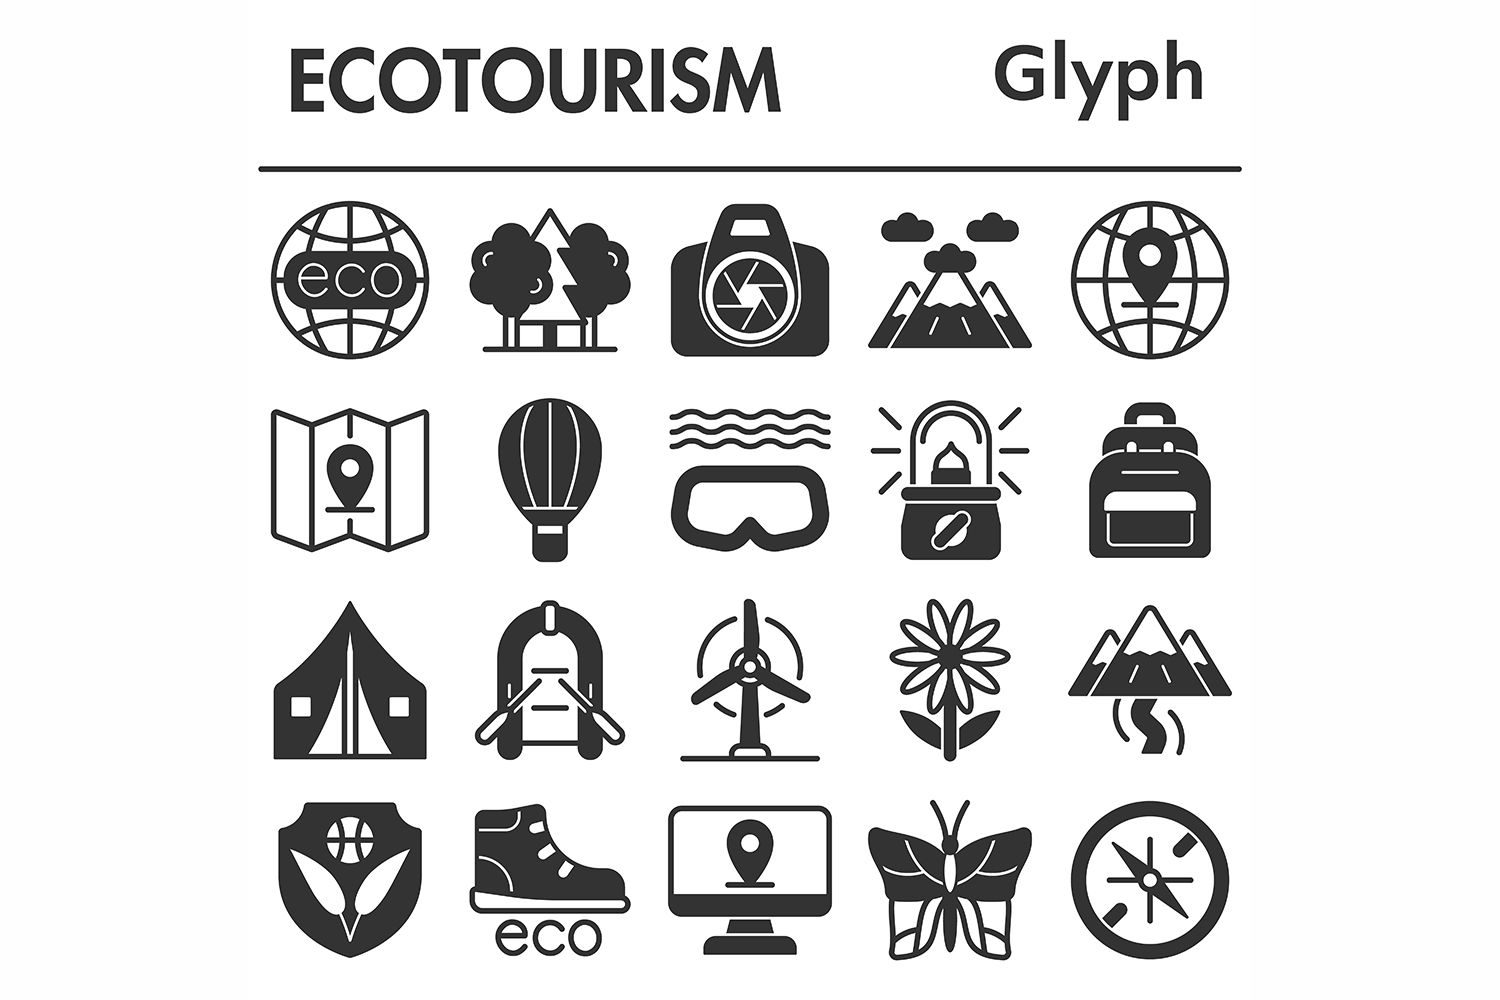 Ecotourism icons set, glyph style pinterest preview image.